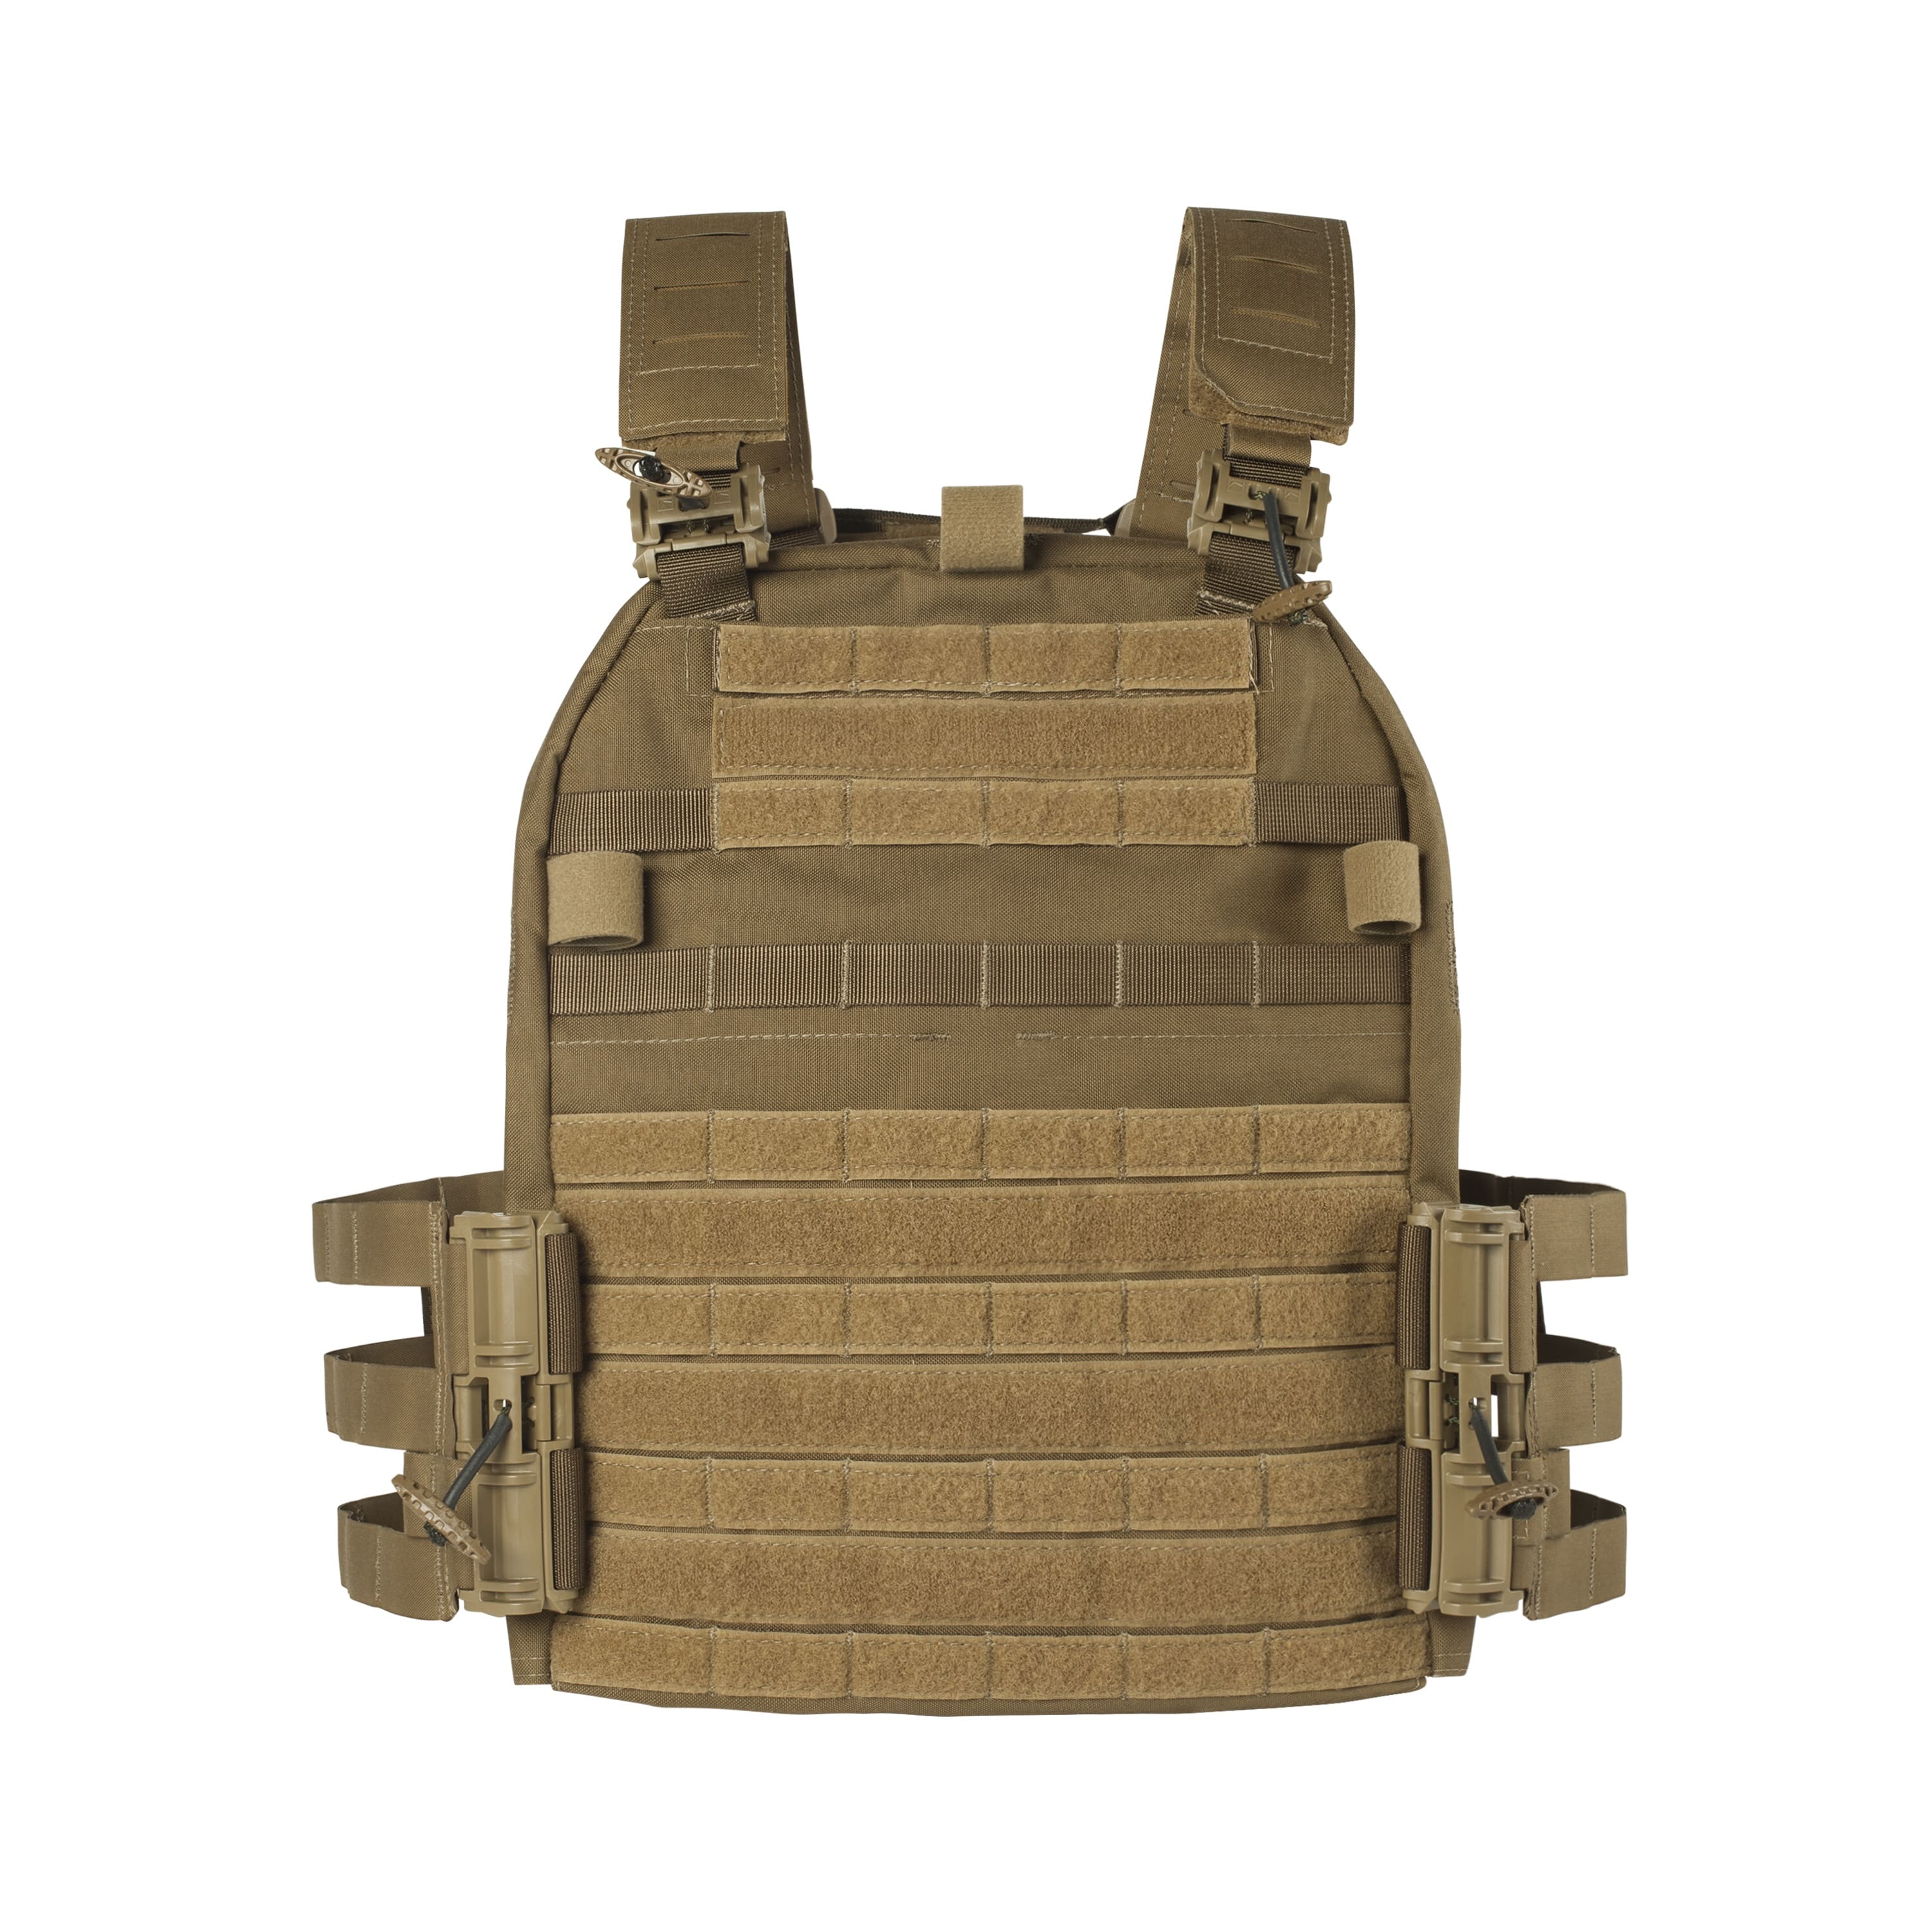 Packs Archives - Page 9 of 103 - Soldier Systems Daily